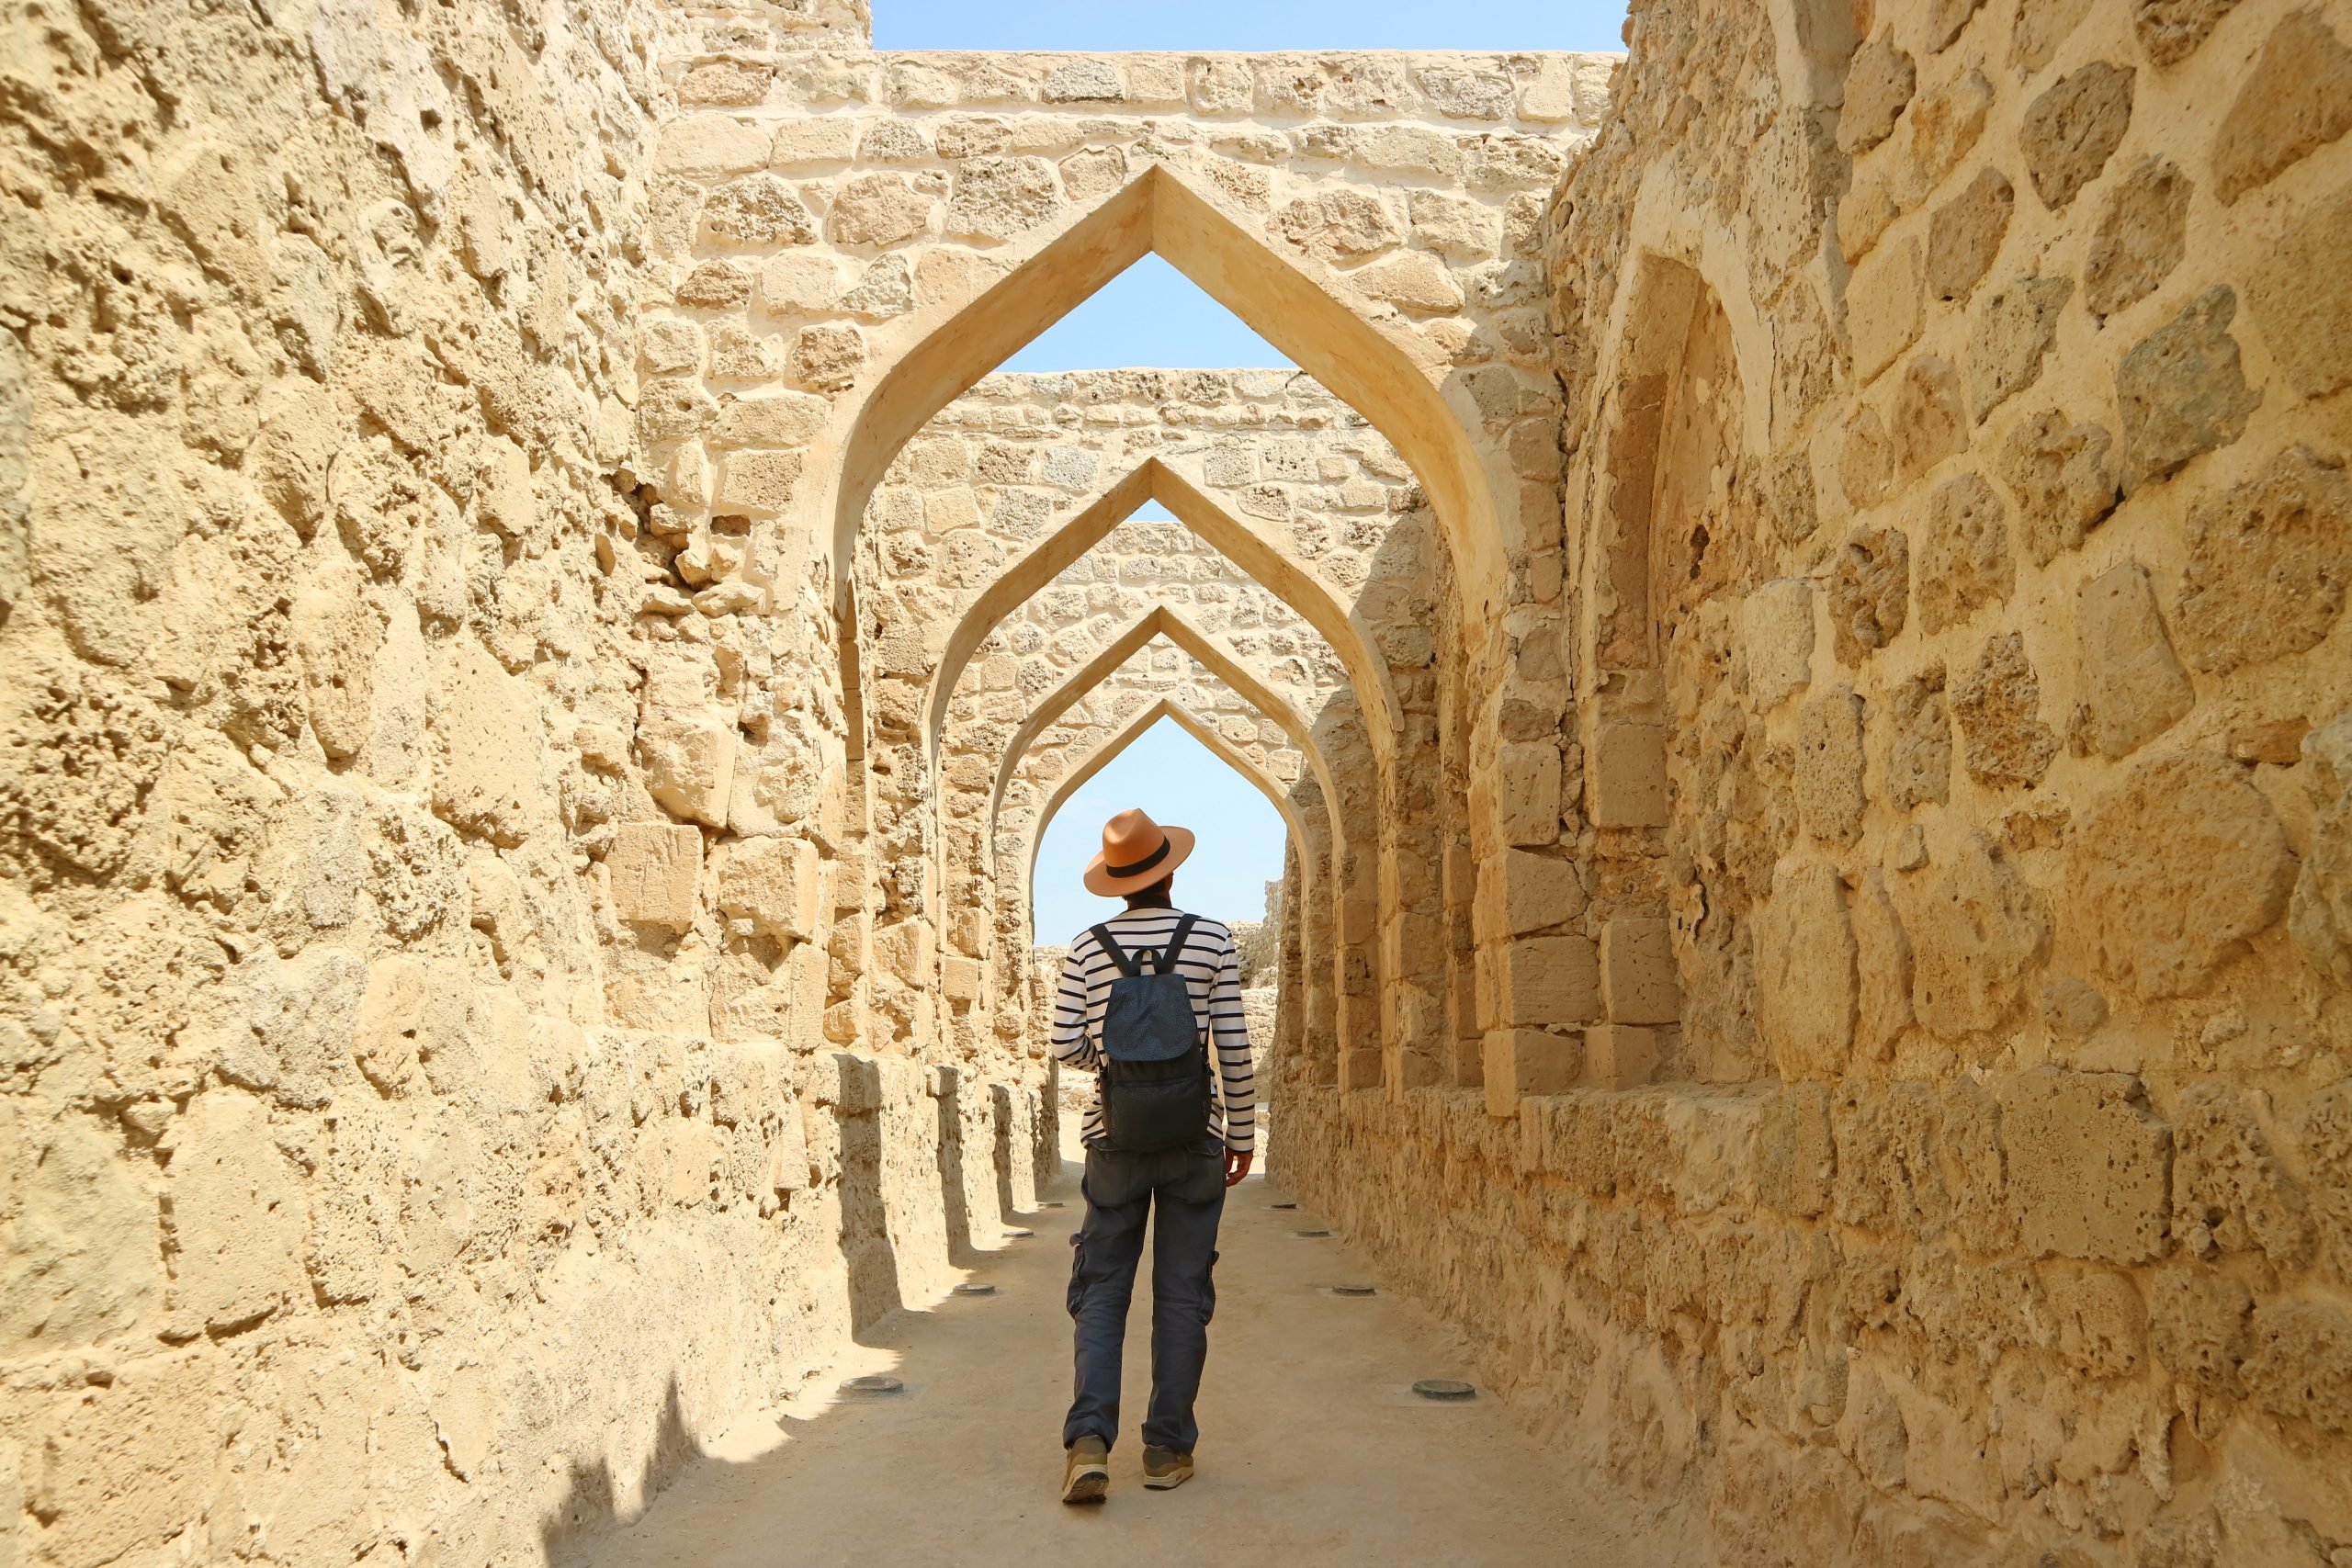 Man Walking Along the Iconic Archways in Bahrain Fort, Manama, Bahrain